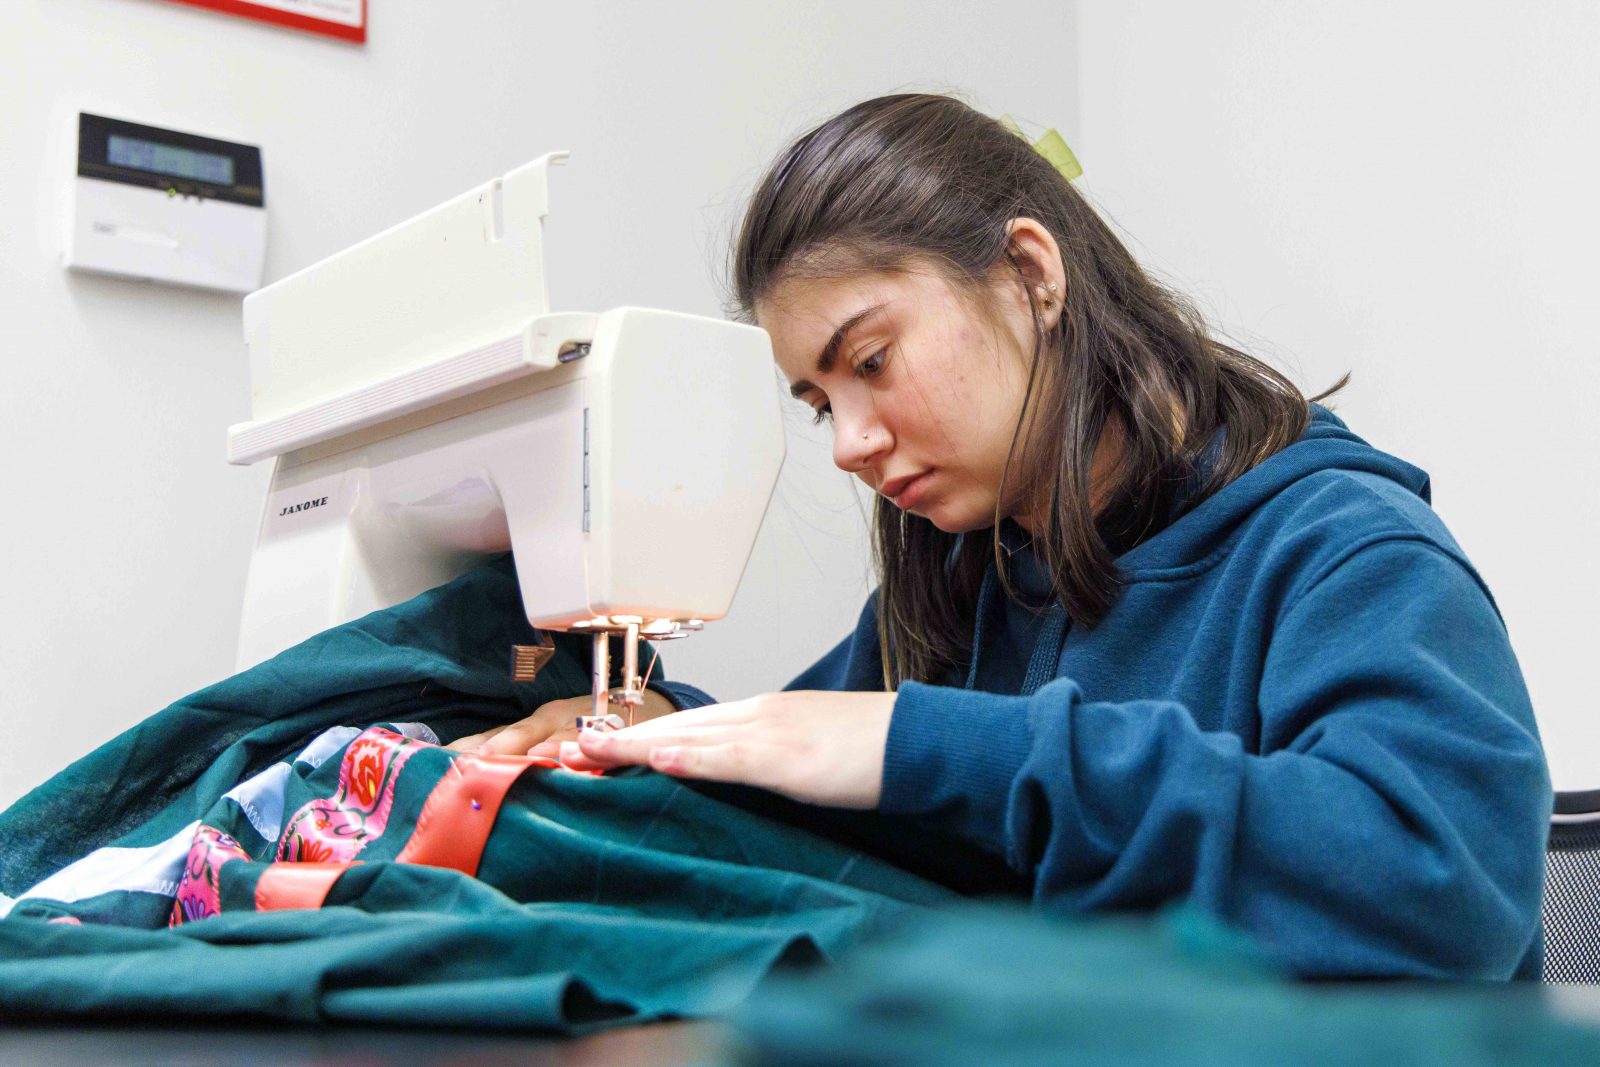 A woman sews a traditional Indigenous skirt using a sewing machine.